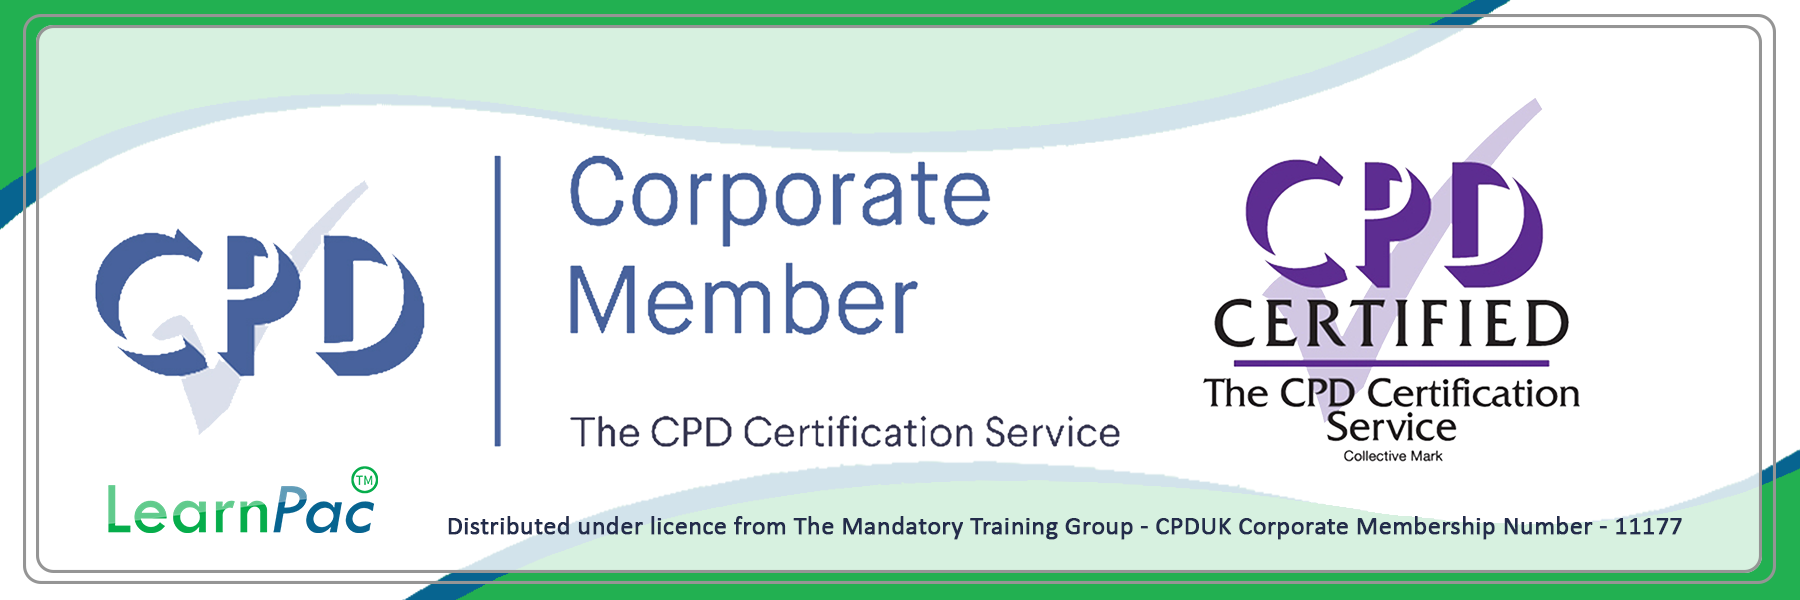 Mandatory and Statutory Training - E-Learning Courses with Certificates - CPD Certified - LearnPac Systems UK -